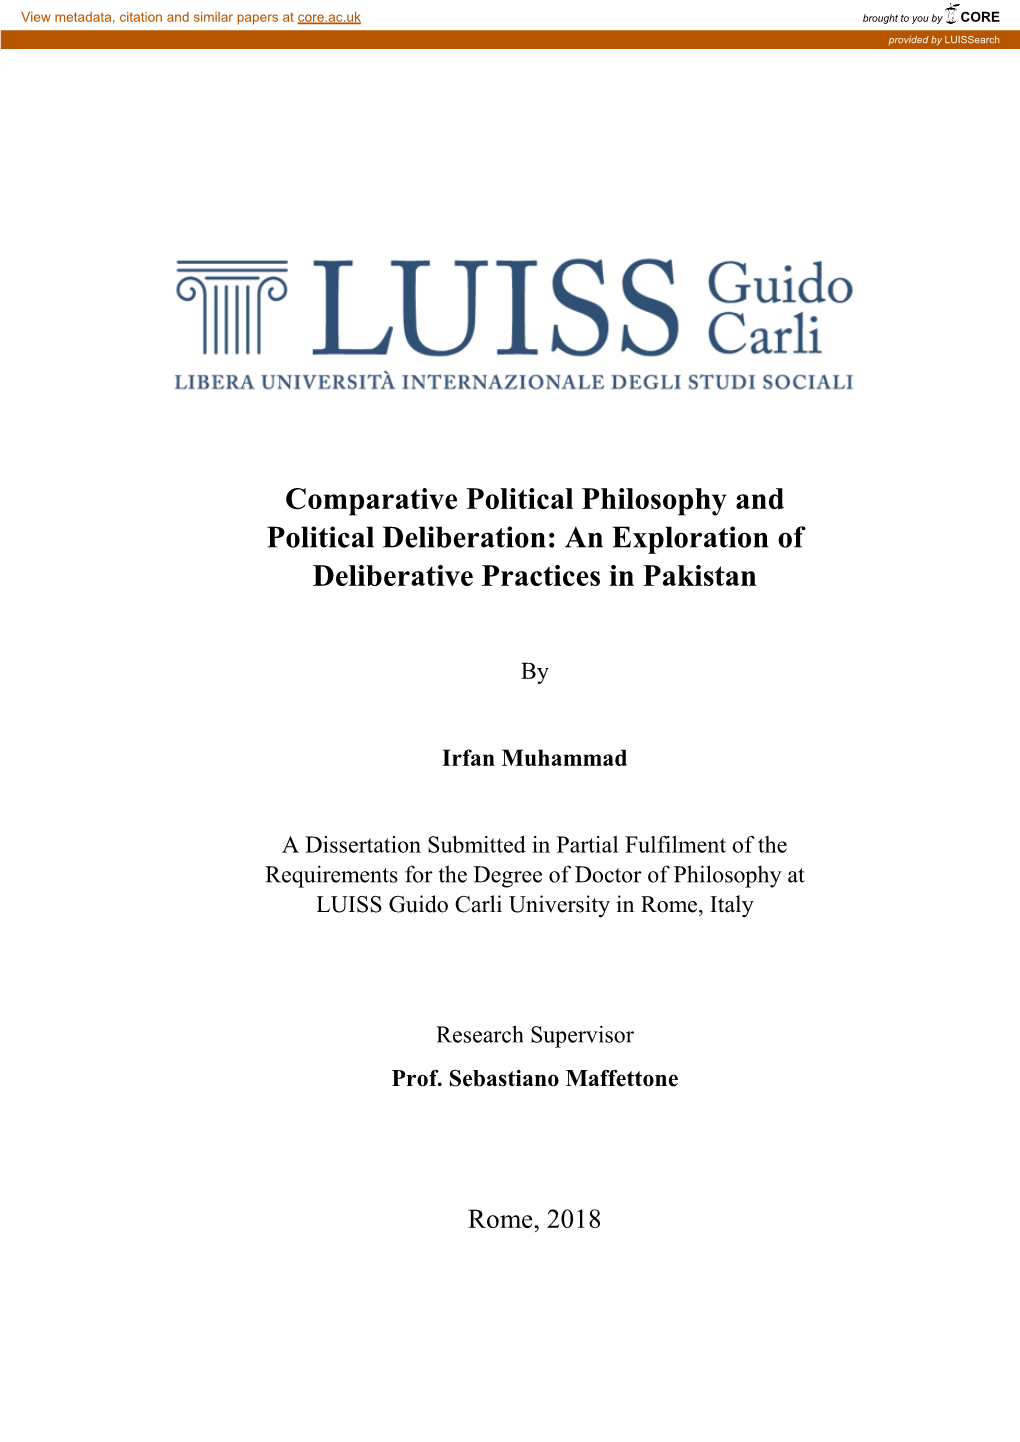 Comparative Political Philosophy and Political Deliberation: an Exploration of Deliberative Practices in Pakistan